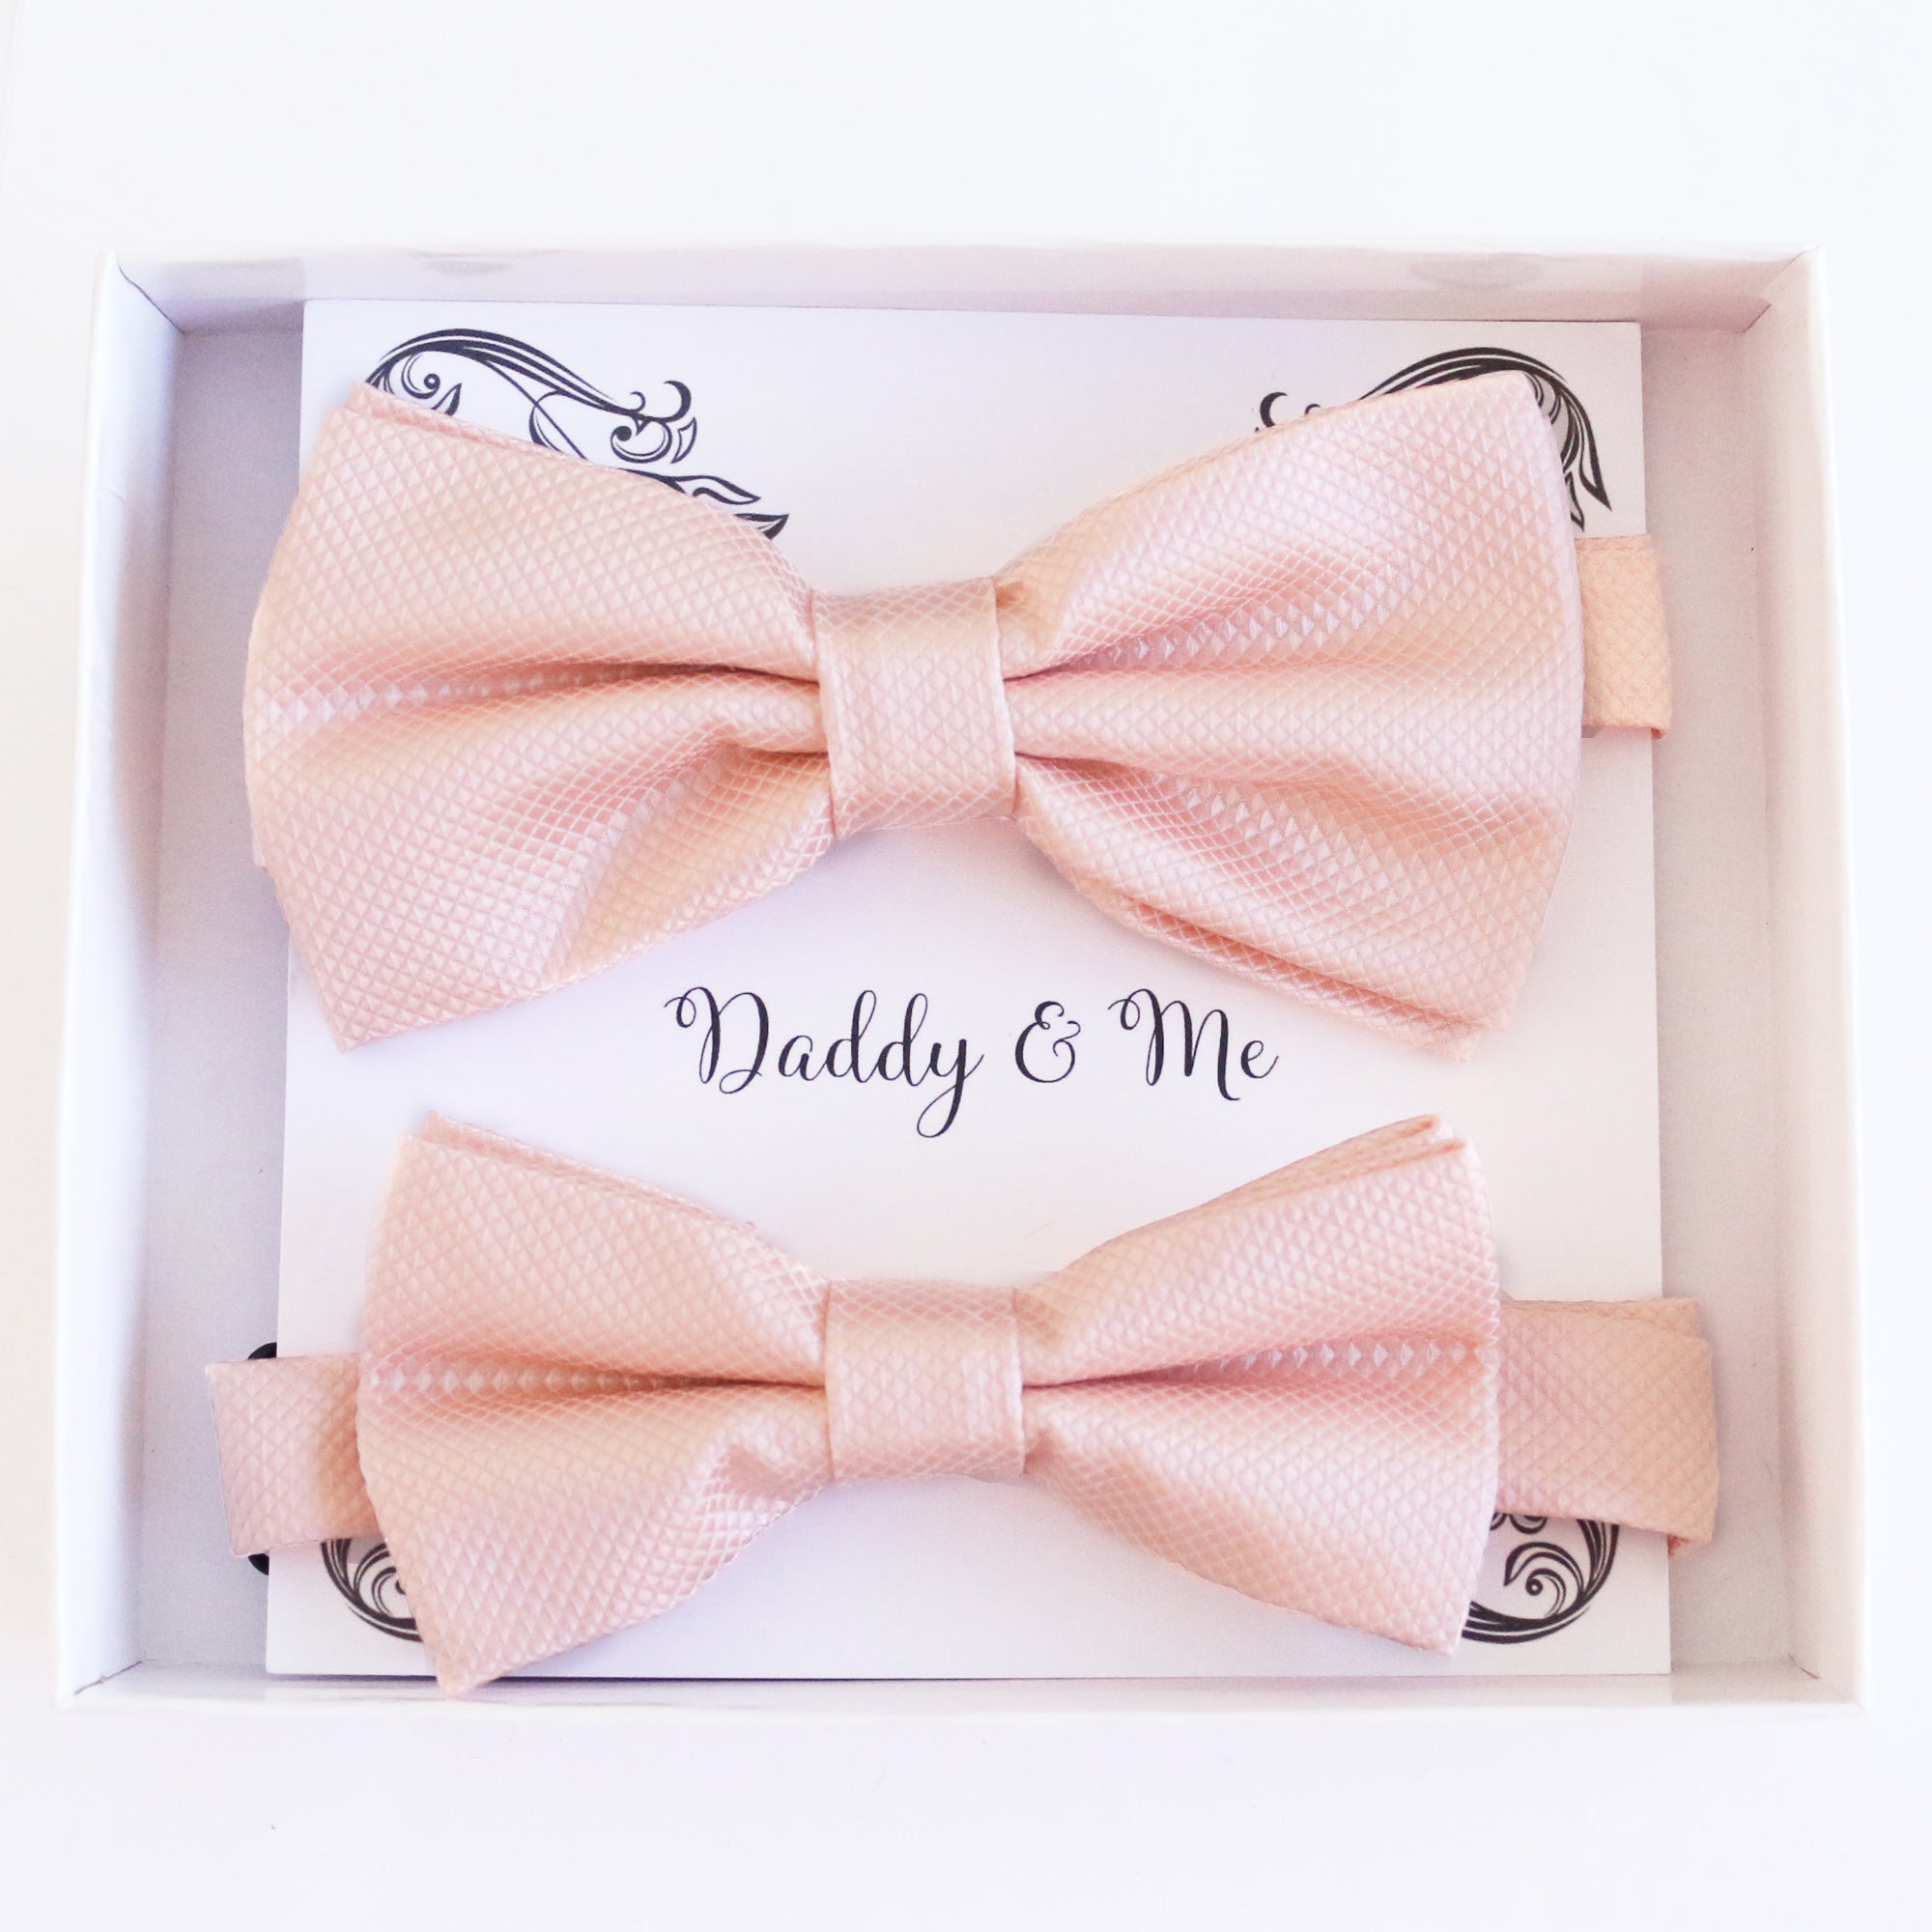 Pearl blush Bow tie set for daddy son, Daddy me gift set Father son match daddy me bow Handmade Pearl blush kids bow Adjustable pre tied bow